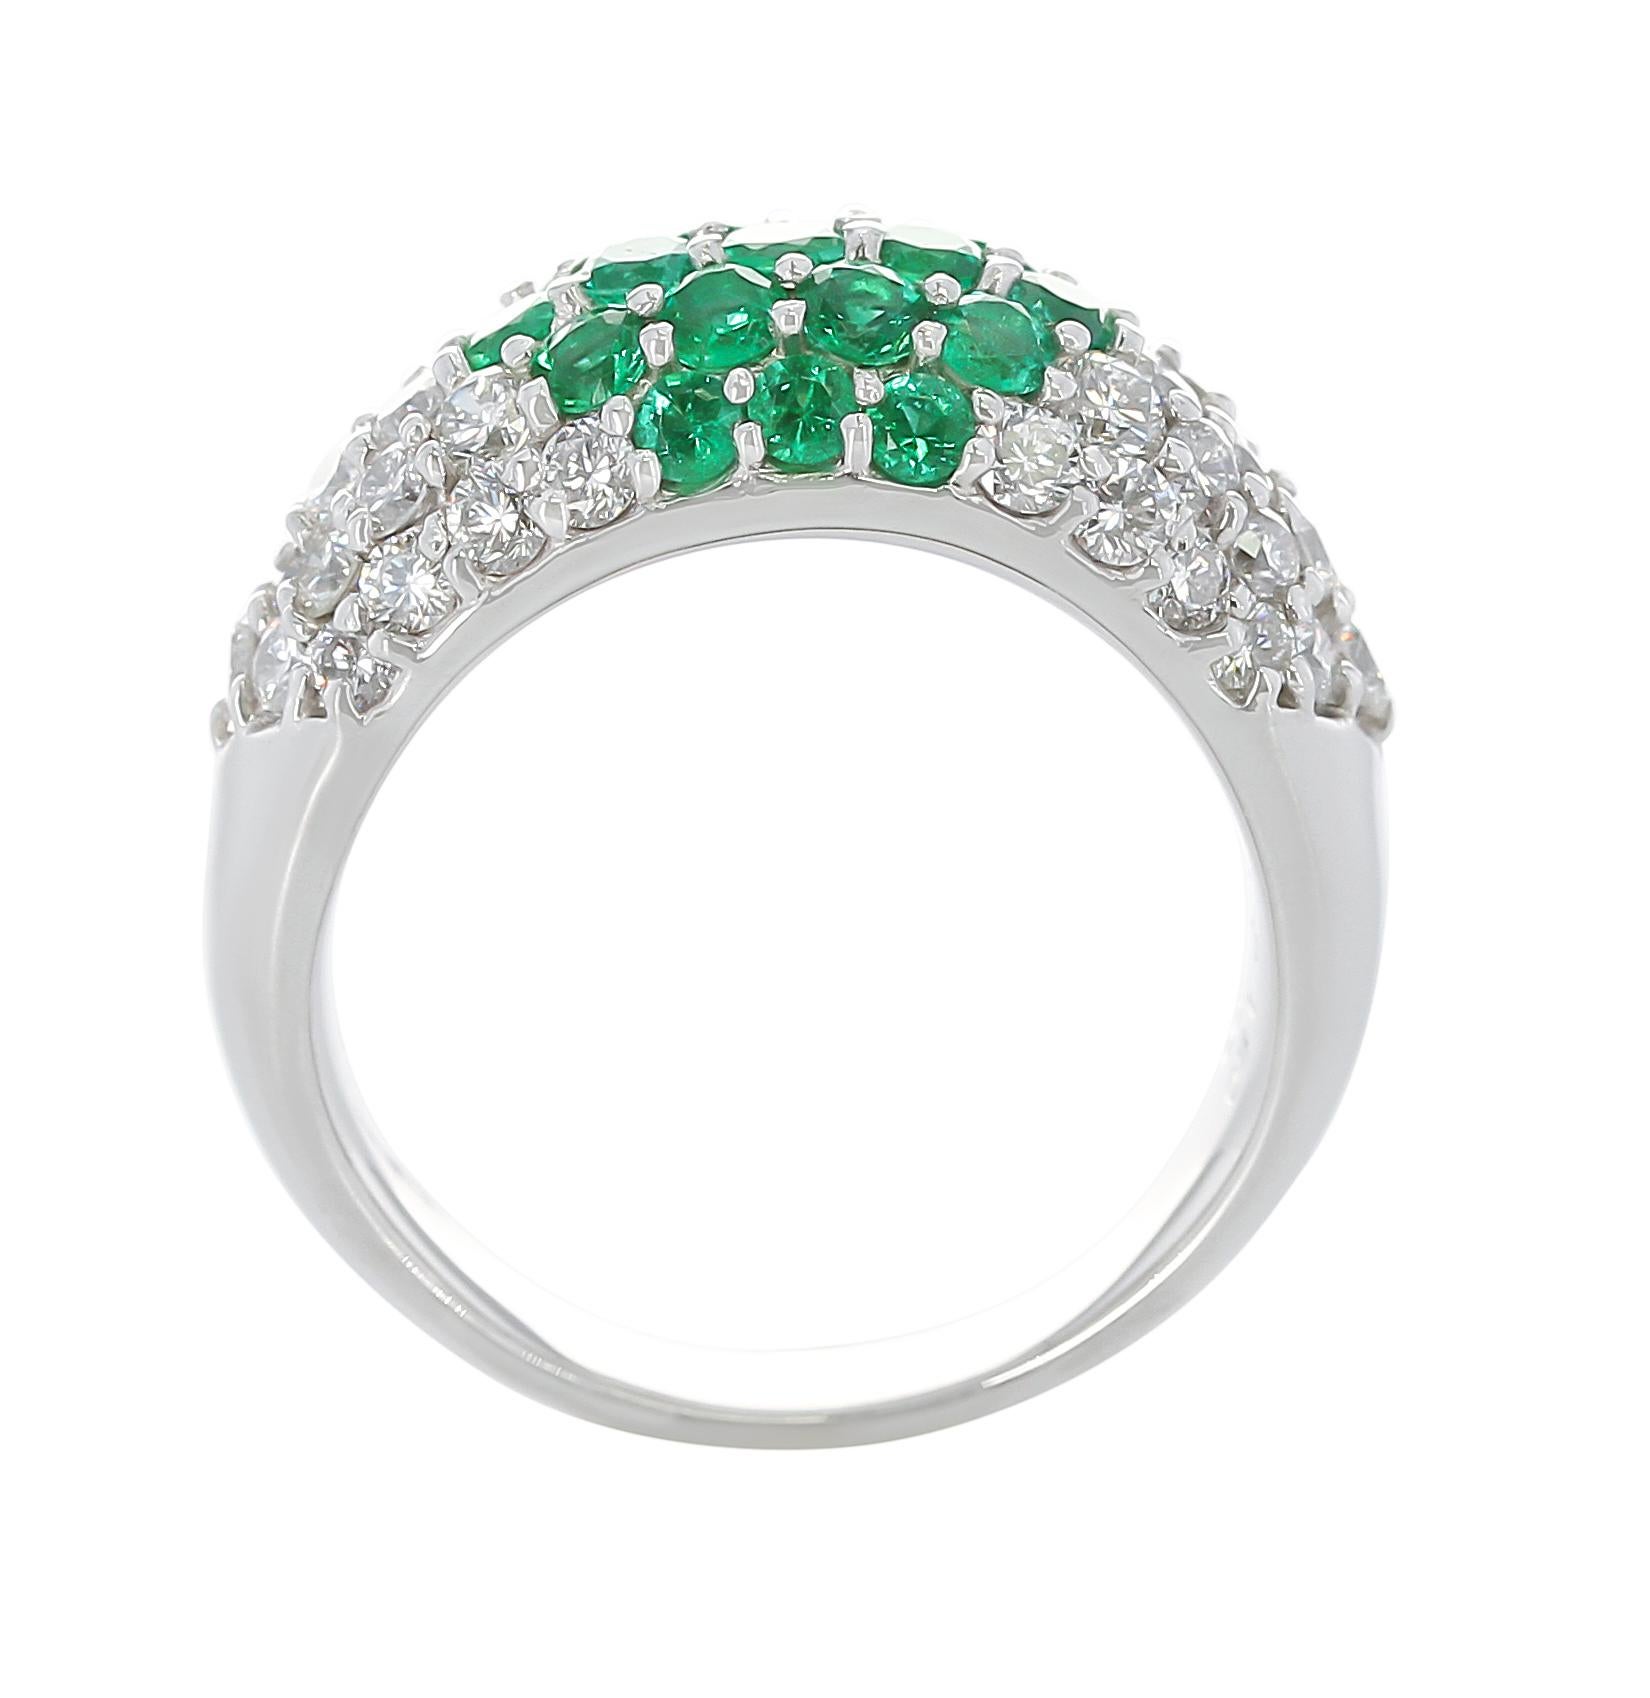 An Emerald and Diamond Ring in Platinum with 1.50 carats of Diamonds and 1 carat of Emeralds. Total Weight: 13.66 grams, Ring Size US 7.25. 